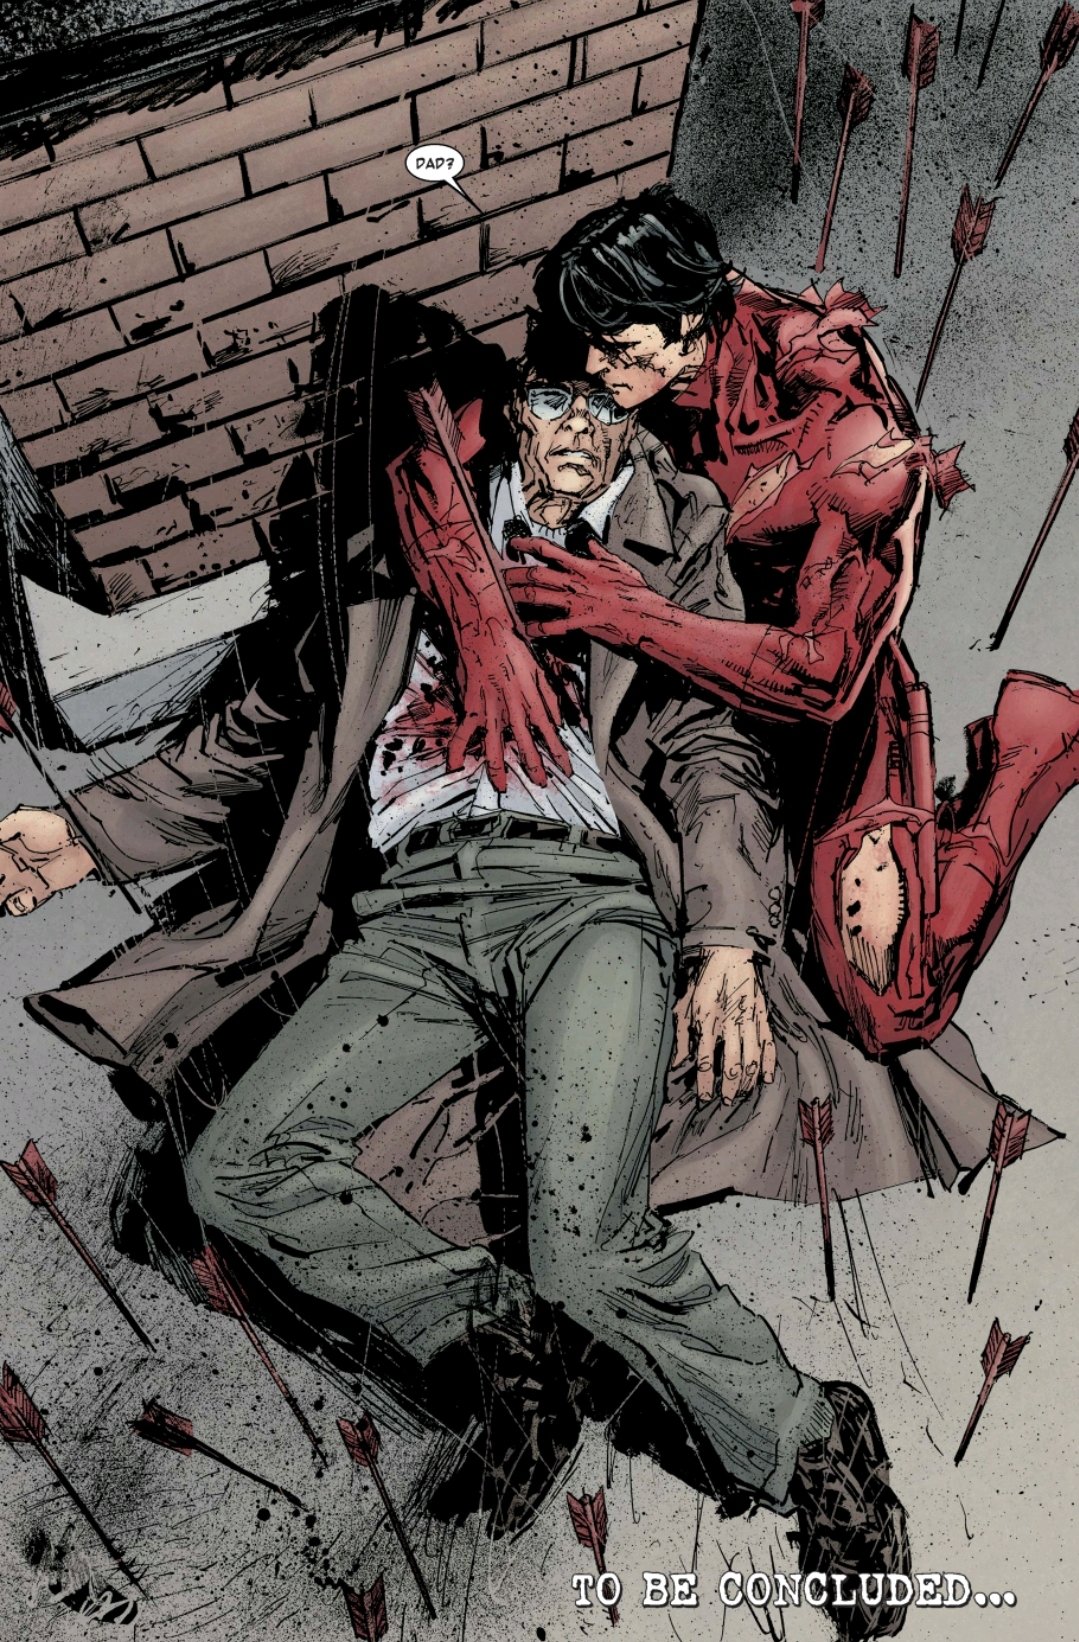 Urich's son as Daredevil cradling a dying Urich